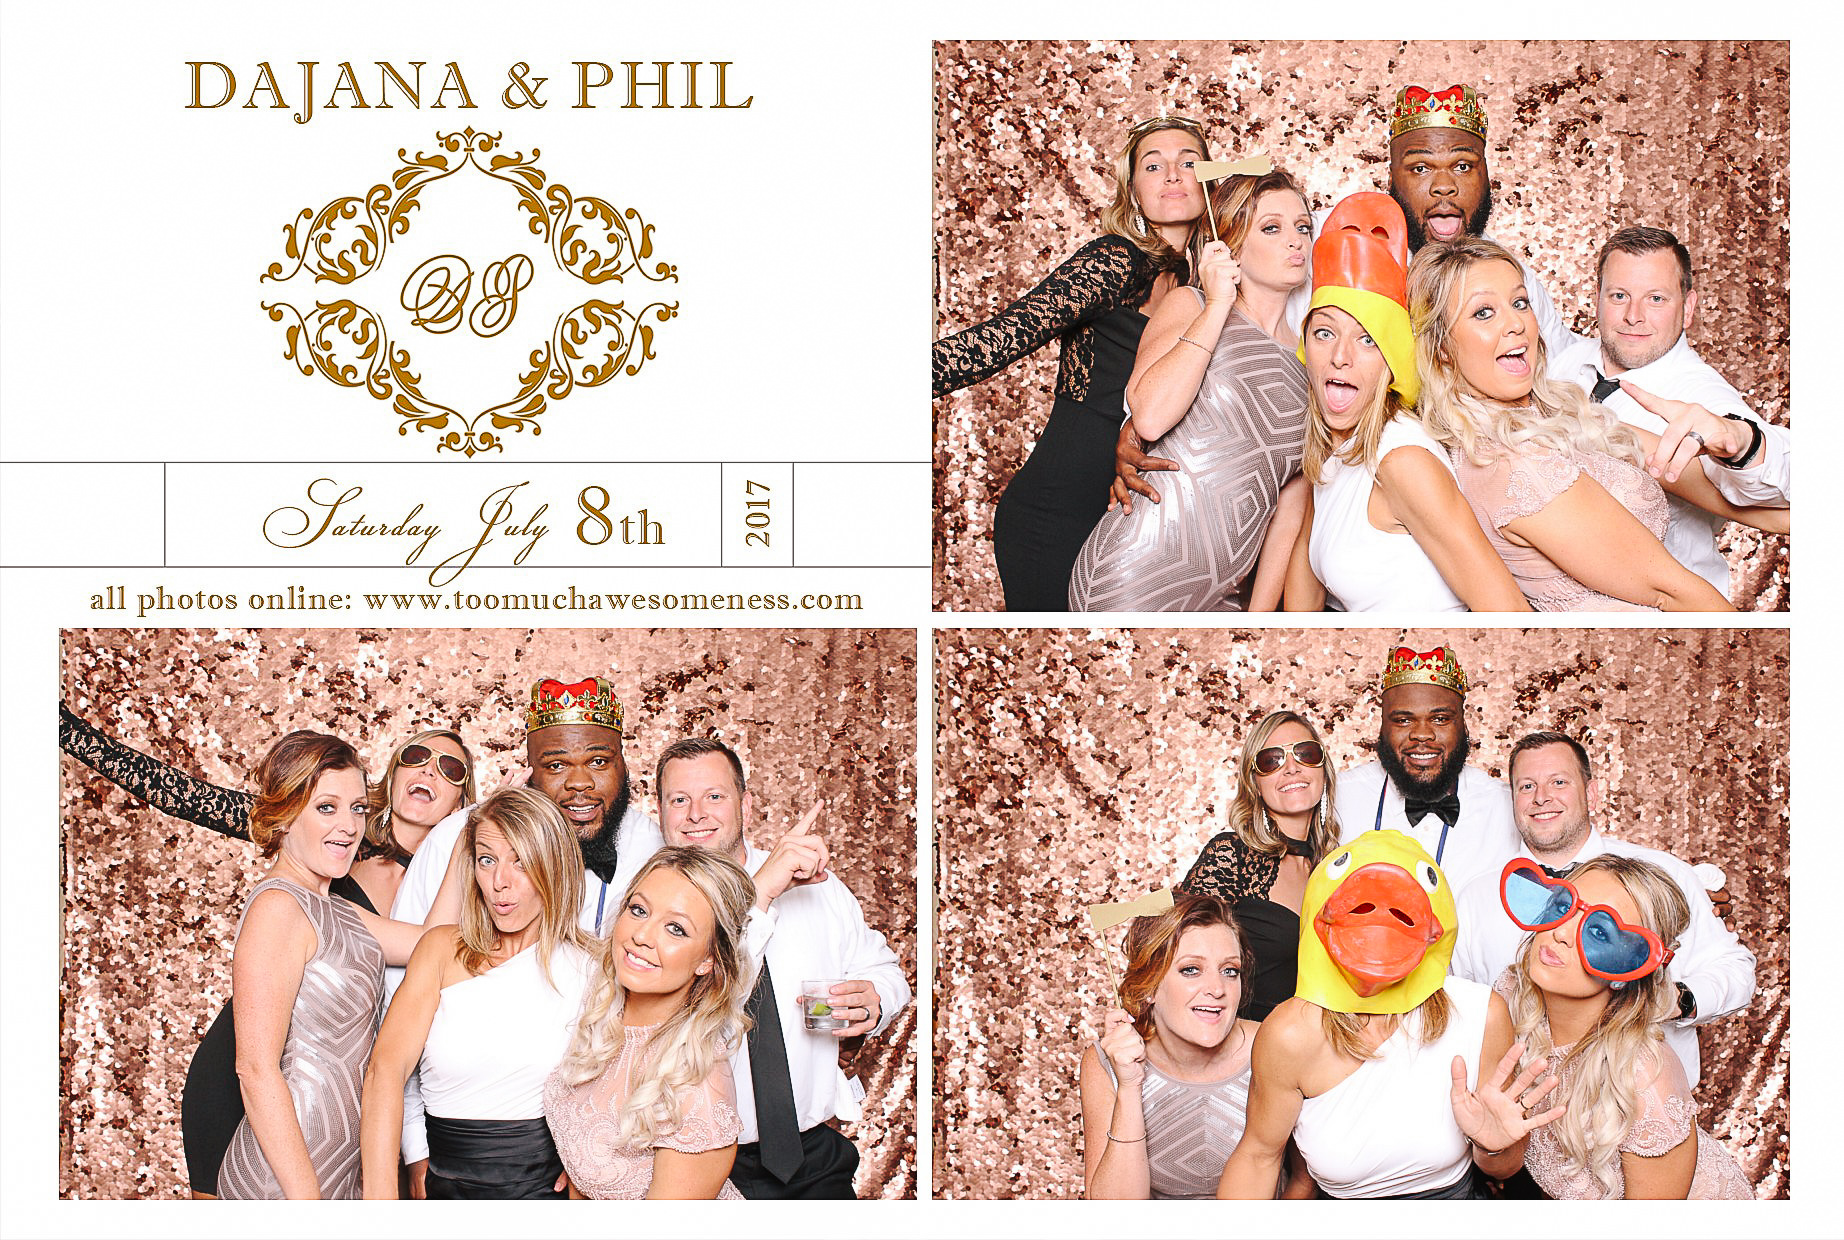 00756 Dajana and Phil Taylor Wedding Photos photobooth by too much awesomeness.jpg